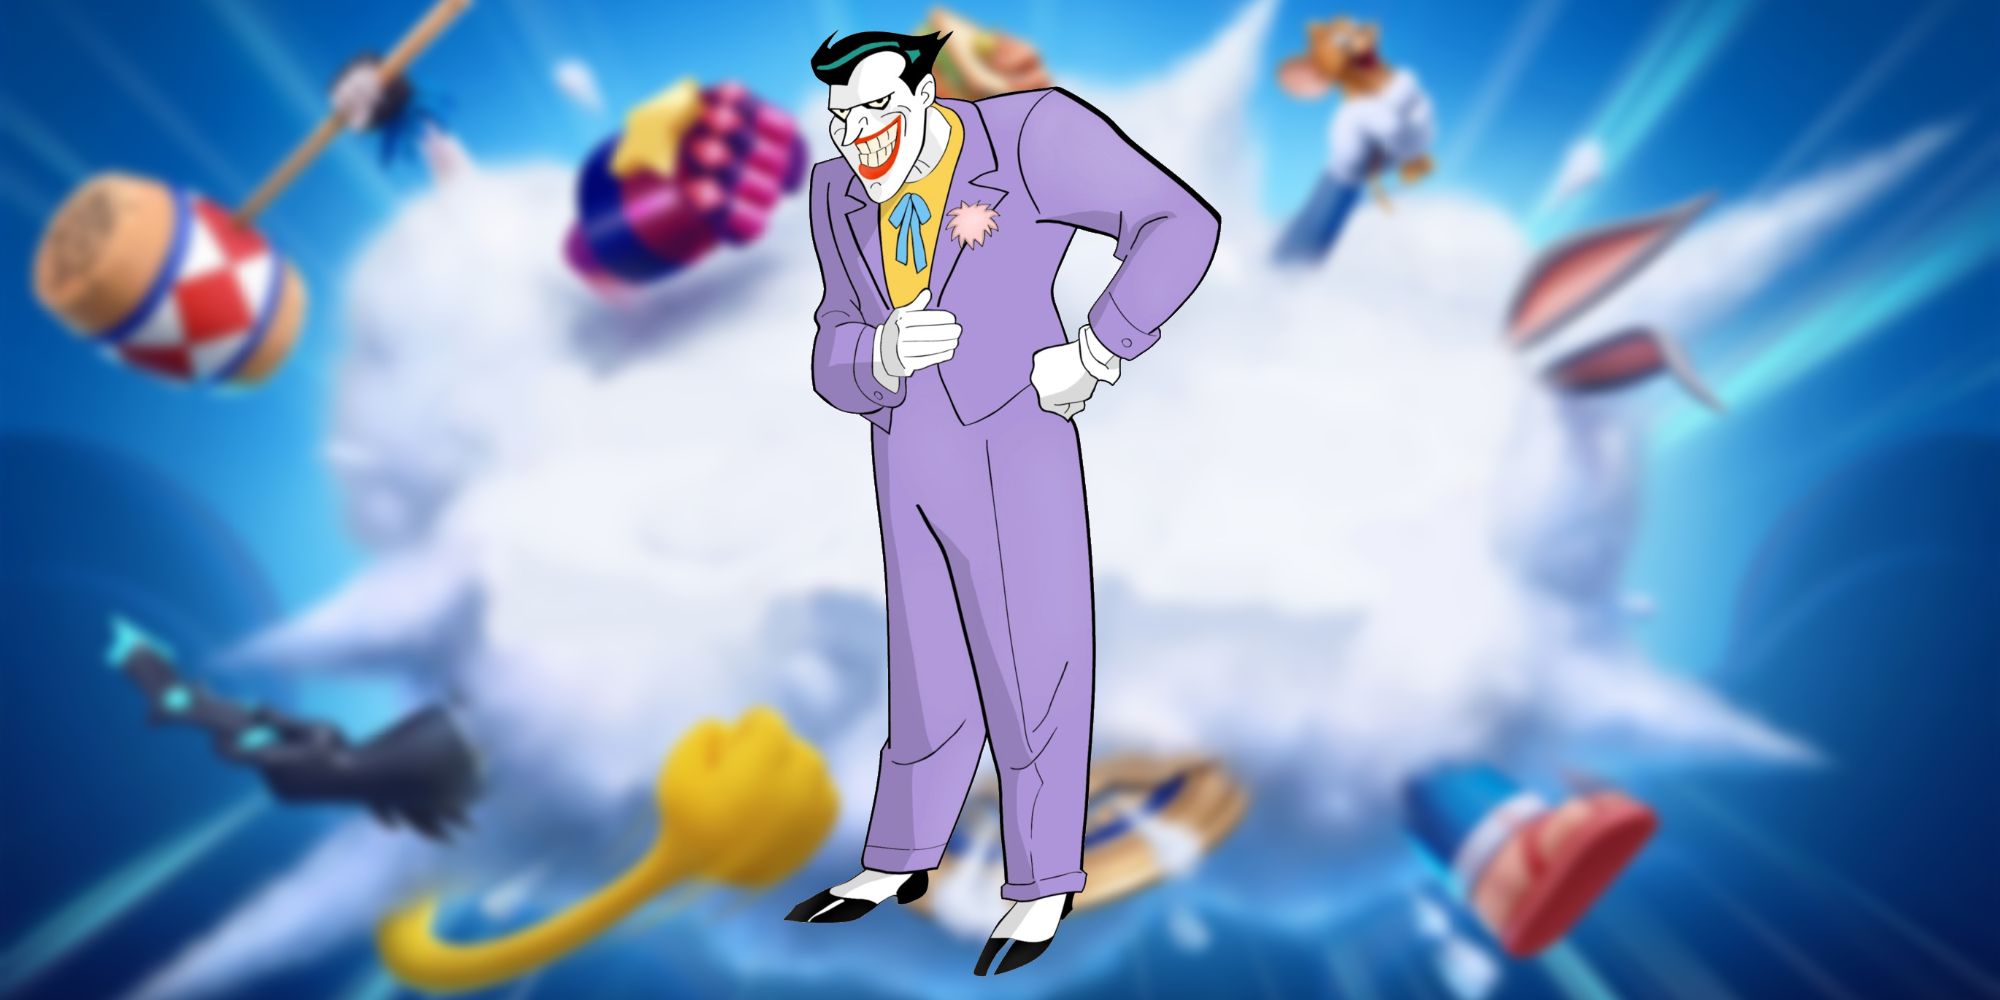 Joker in front of a cloud of MultiVersus characters fighting